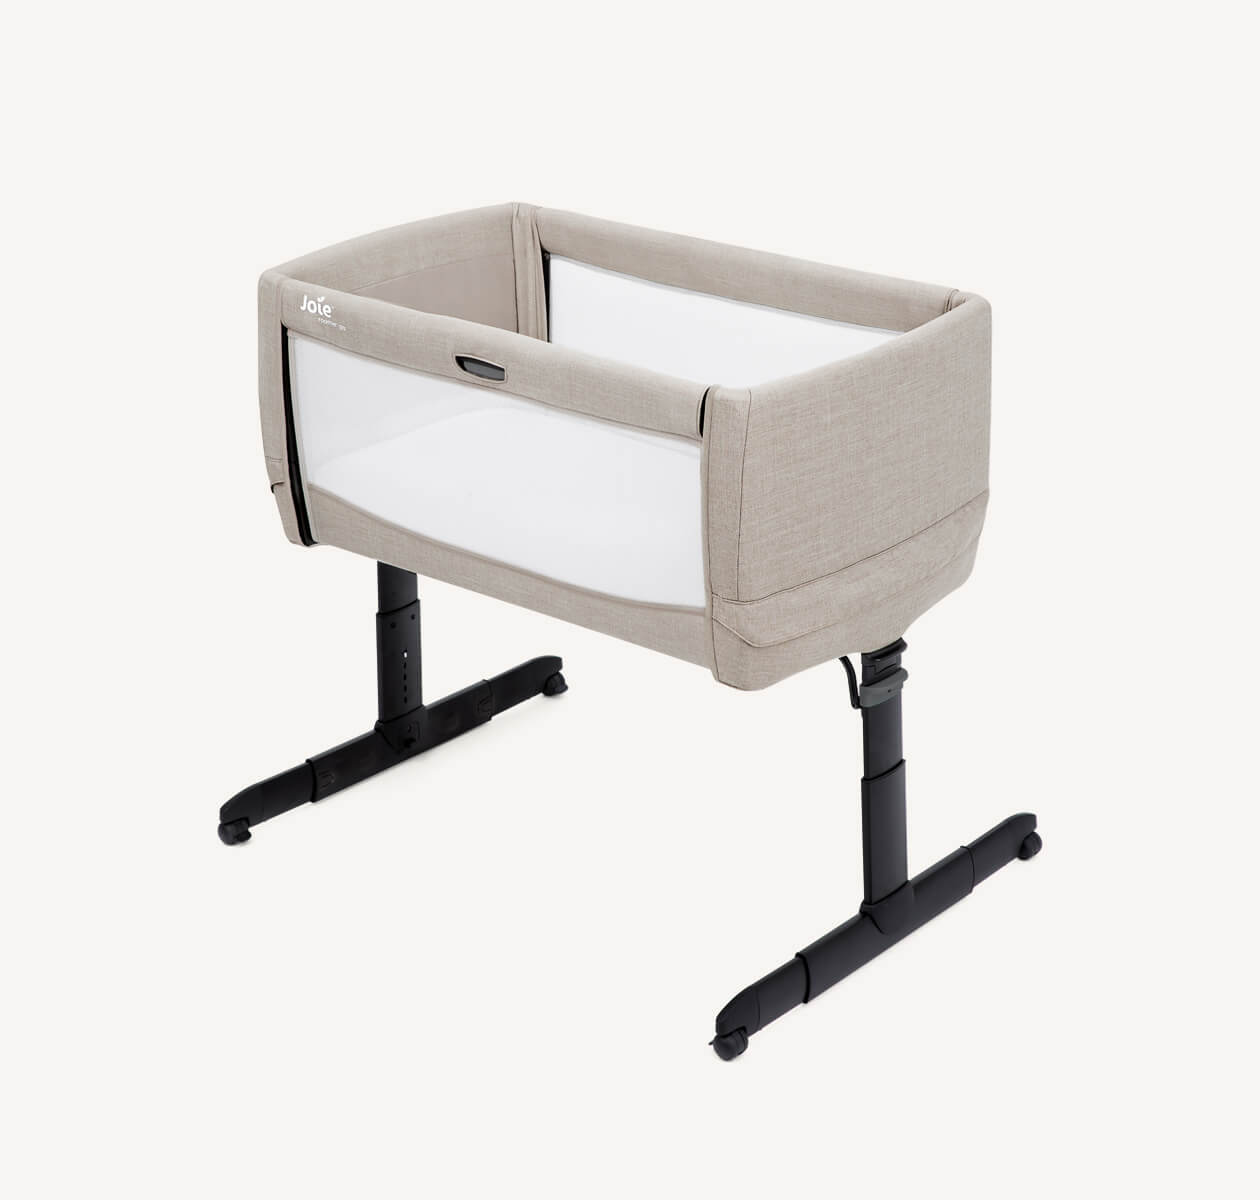 JOIE Roomie™  Go Travel  Bedside Crib Clay